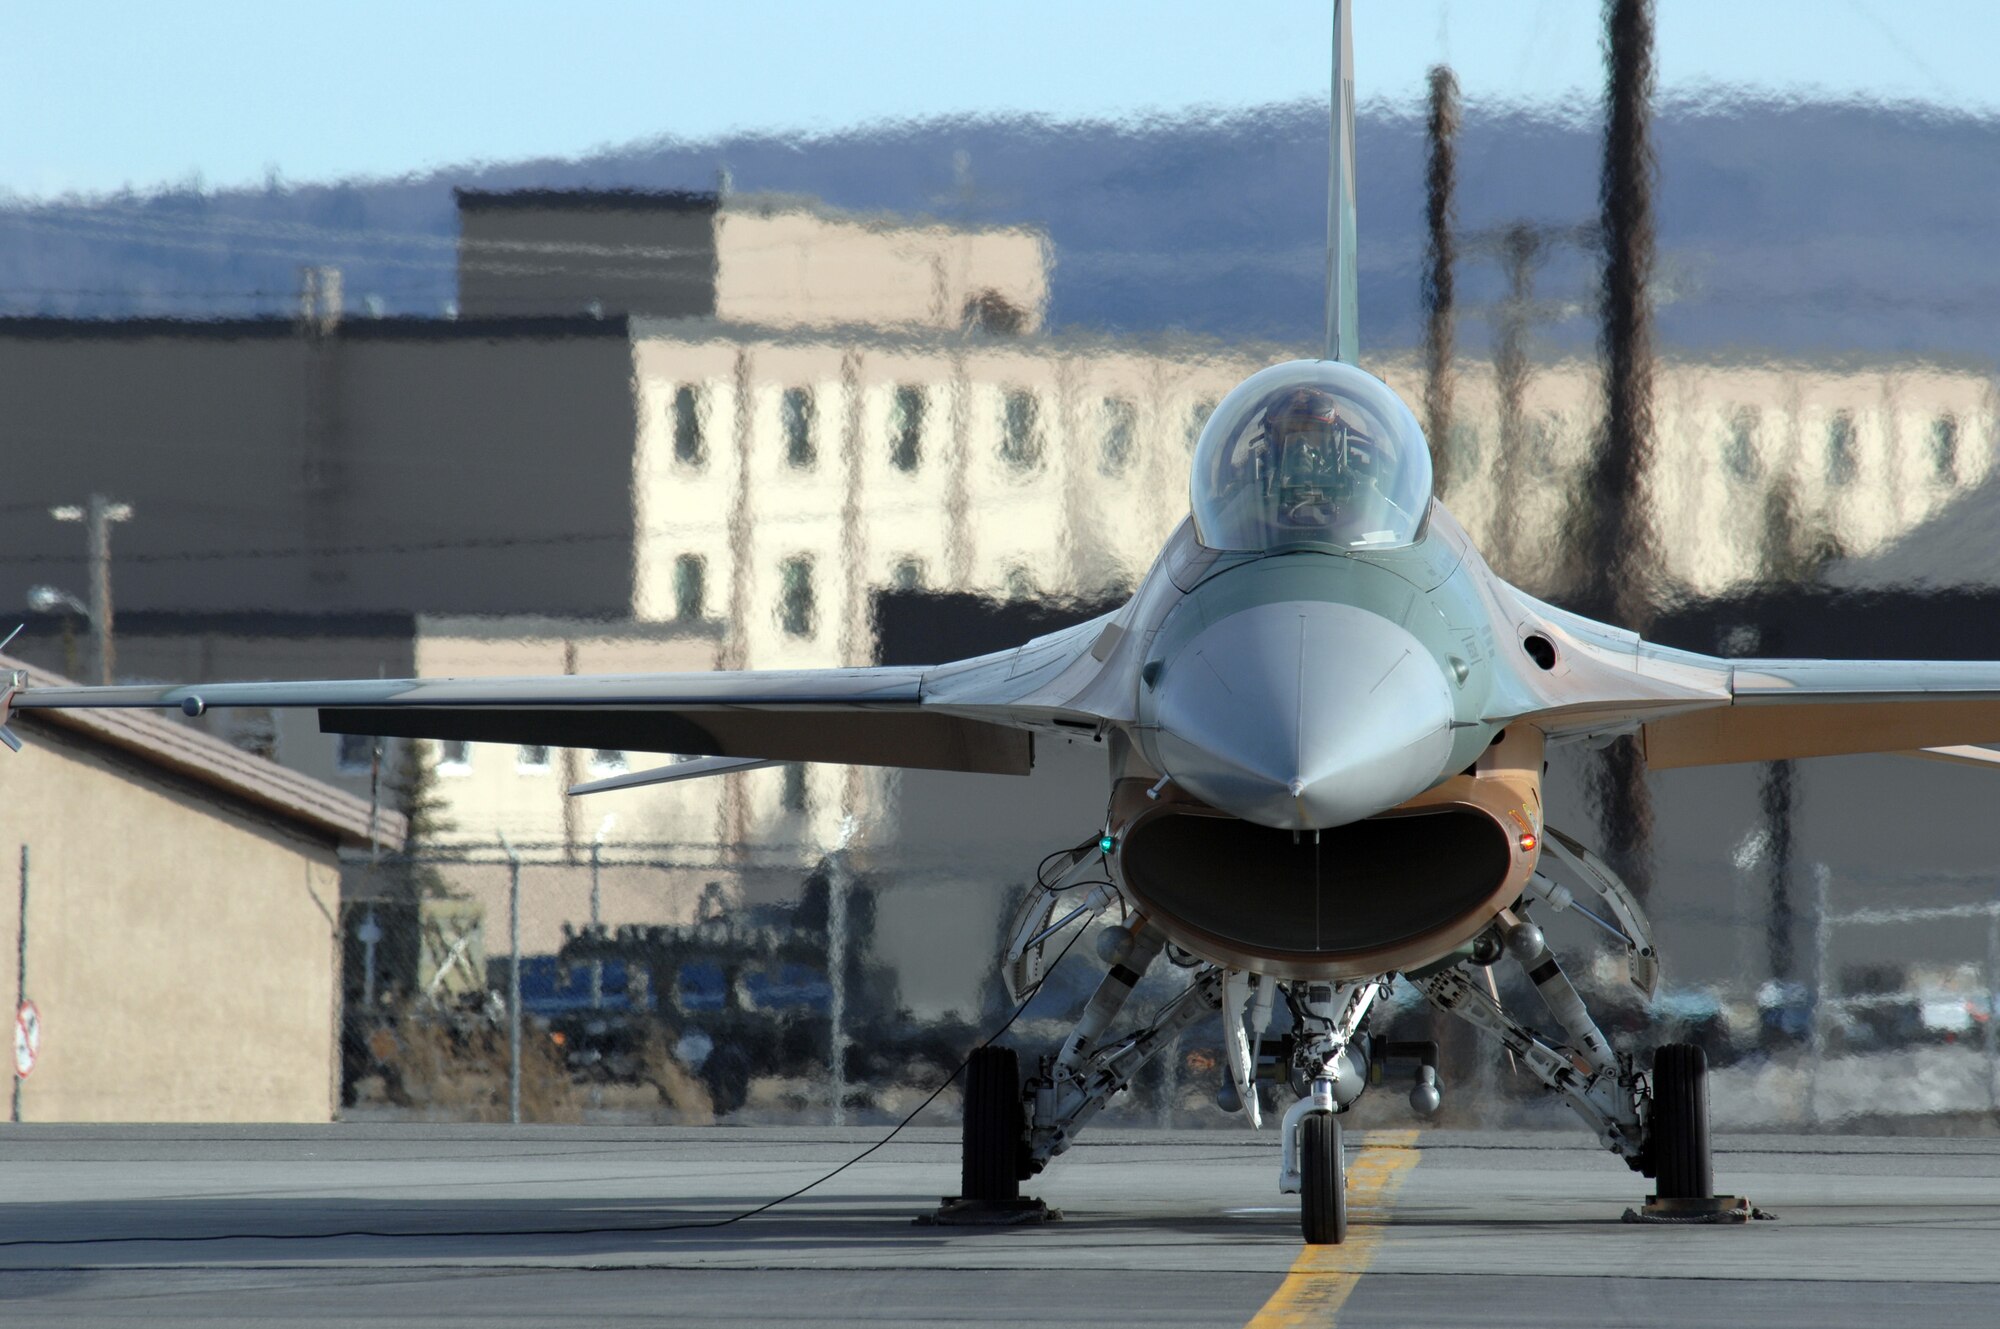 EIELSON AIR FORCE BASE, Alaska -- An F-16 Fighting Falcon from the 64th Aggressor Squadron, Nellis Air Force Base, Nevada prepares to take off for a mission during Red Flag-Alaska 07-1 here on April 10. Red Flag-Alaska is a Pacific Air Forces-directed field training exercise for U.S. forces flown under simulated air combat conditions. It is conducted on the Pacific Alaskan Range Complex with air operations flown out of Eielson and Elmendorf Air Force Bases. 
(U.S. Air Force Photo by Staff Sgt Joshua Strang) 